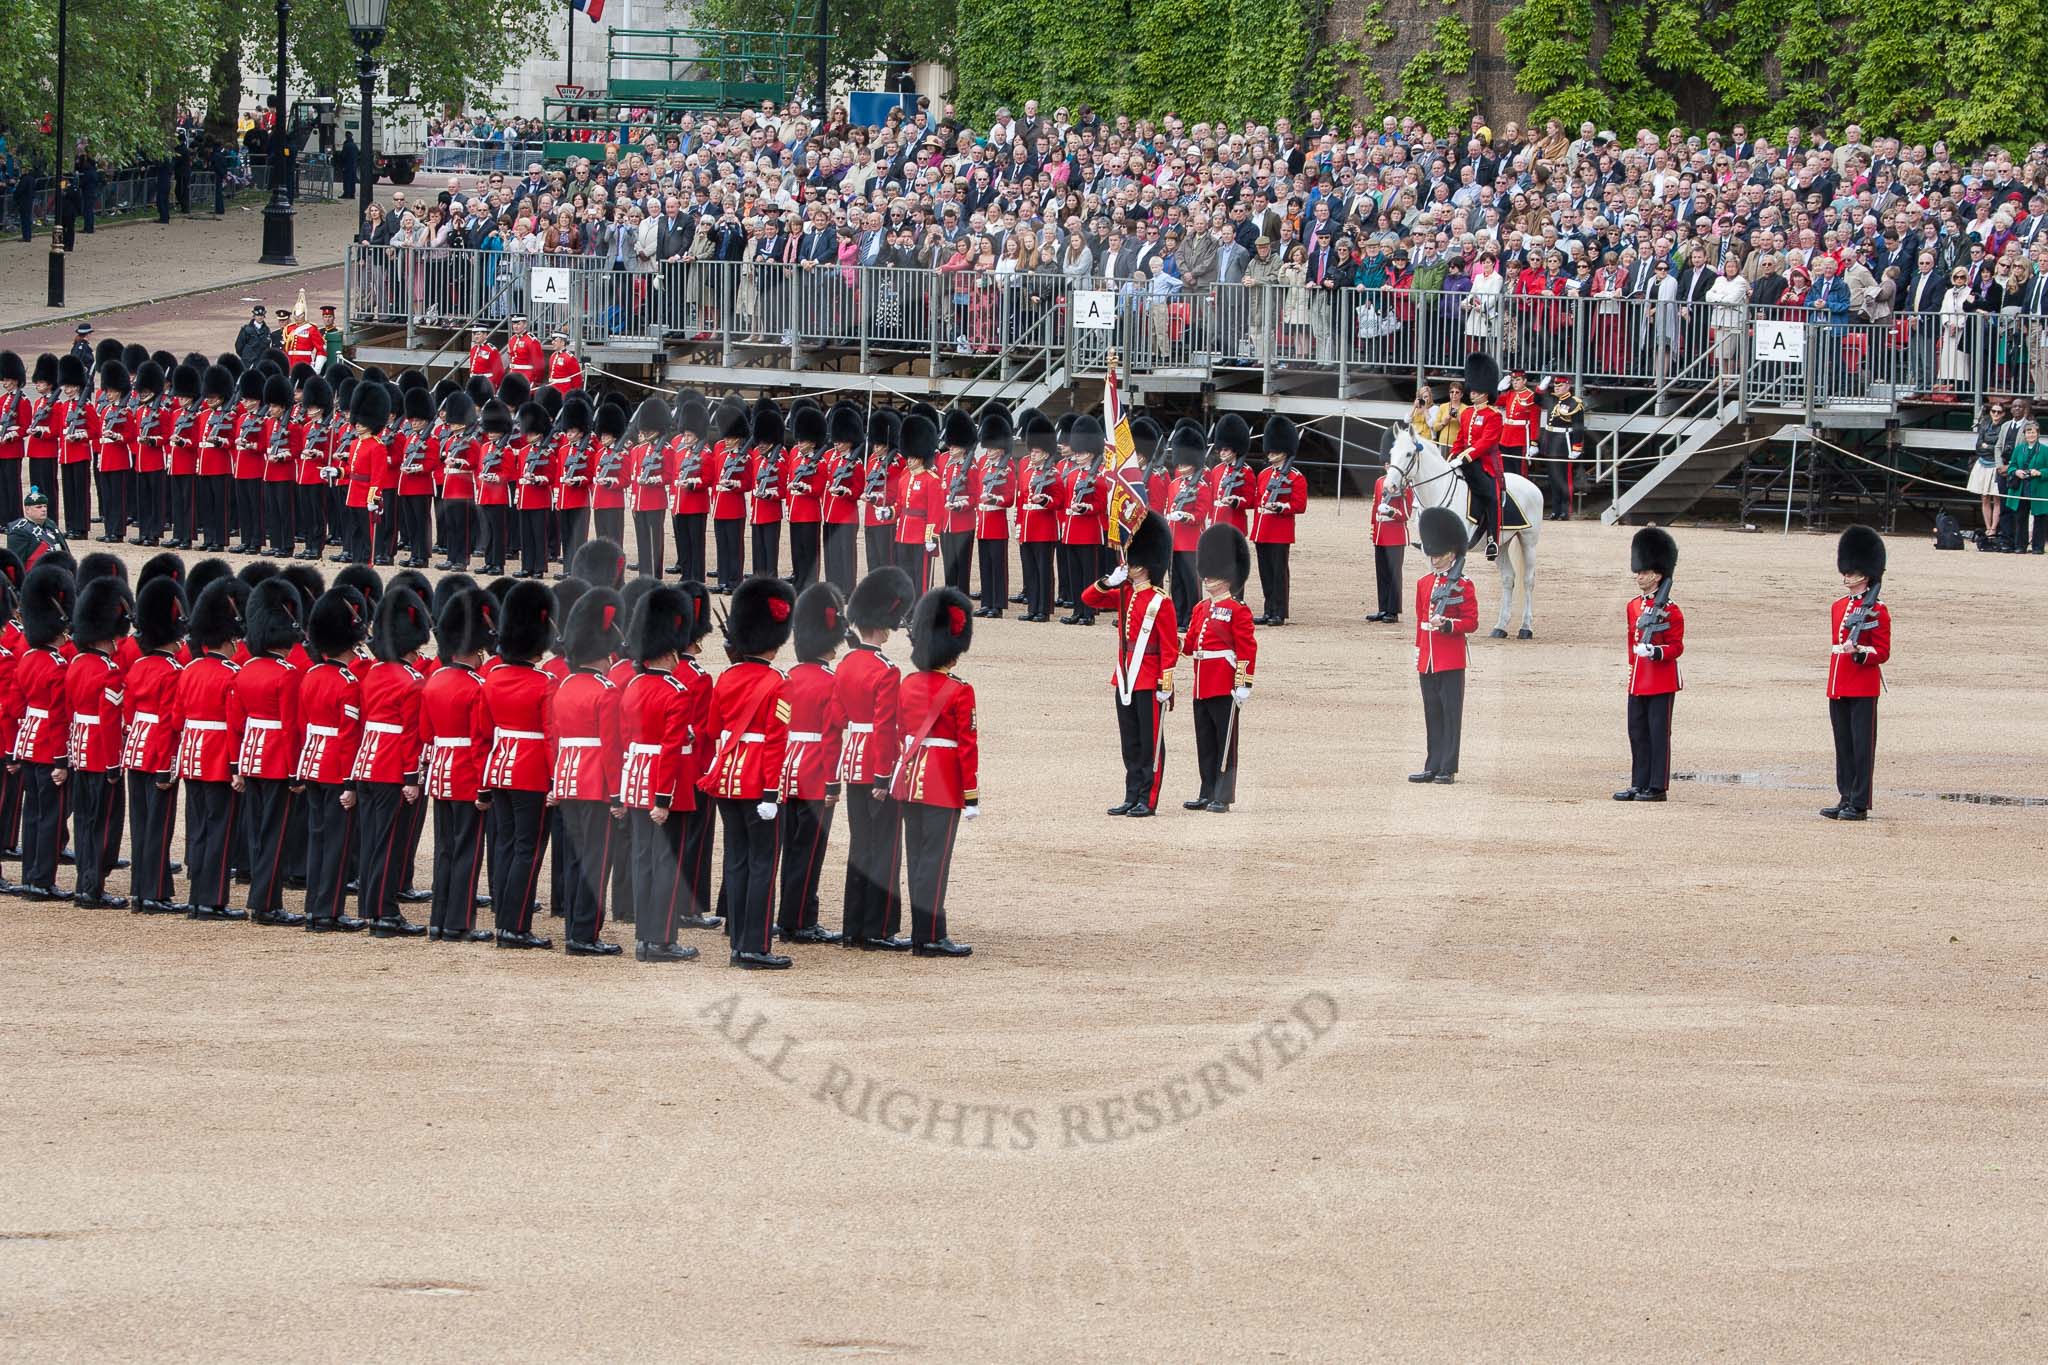 The Colonel's Review 2012: The Colour is now in the hands of No. 1 Guard, and the Colour Sergeant and the two Sentries (on the very right) have done their duty, and are ready to march off..
Horse Guards Parade, Westminster,
London SW1,

United Kingdom,
on 09 June 2012 at 11:19, image #276